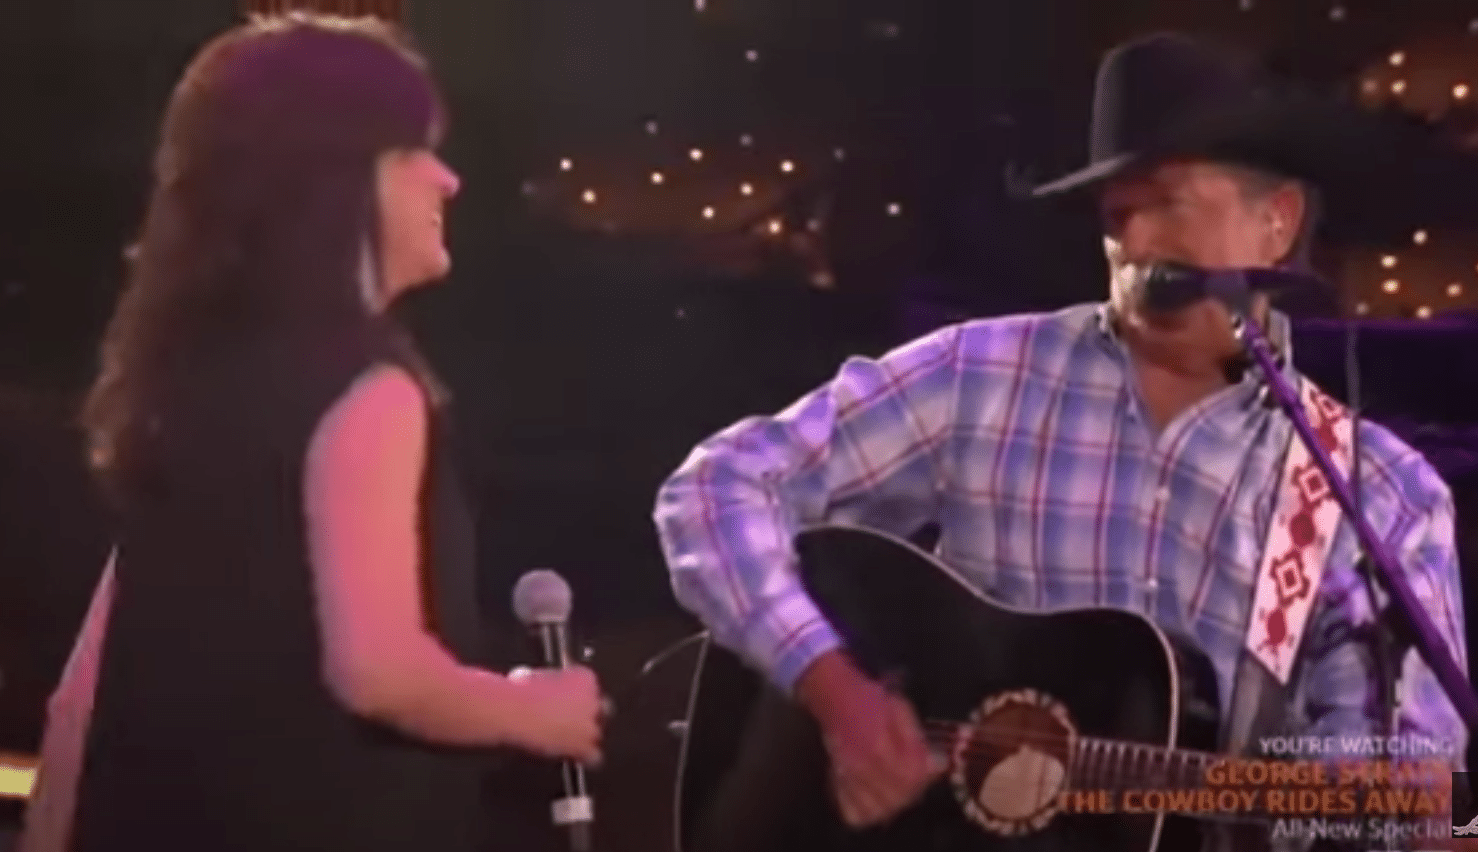 George Strait & Martina McBride's chemistry was off the charts!